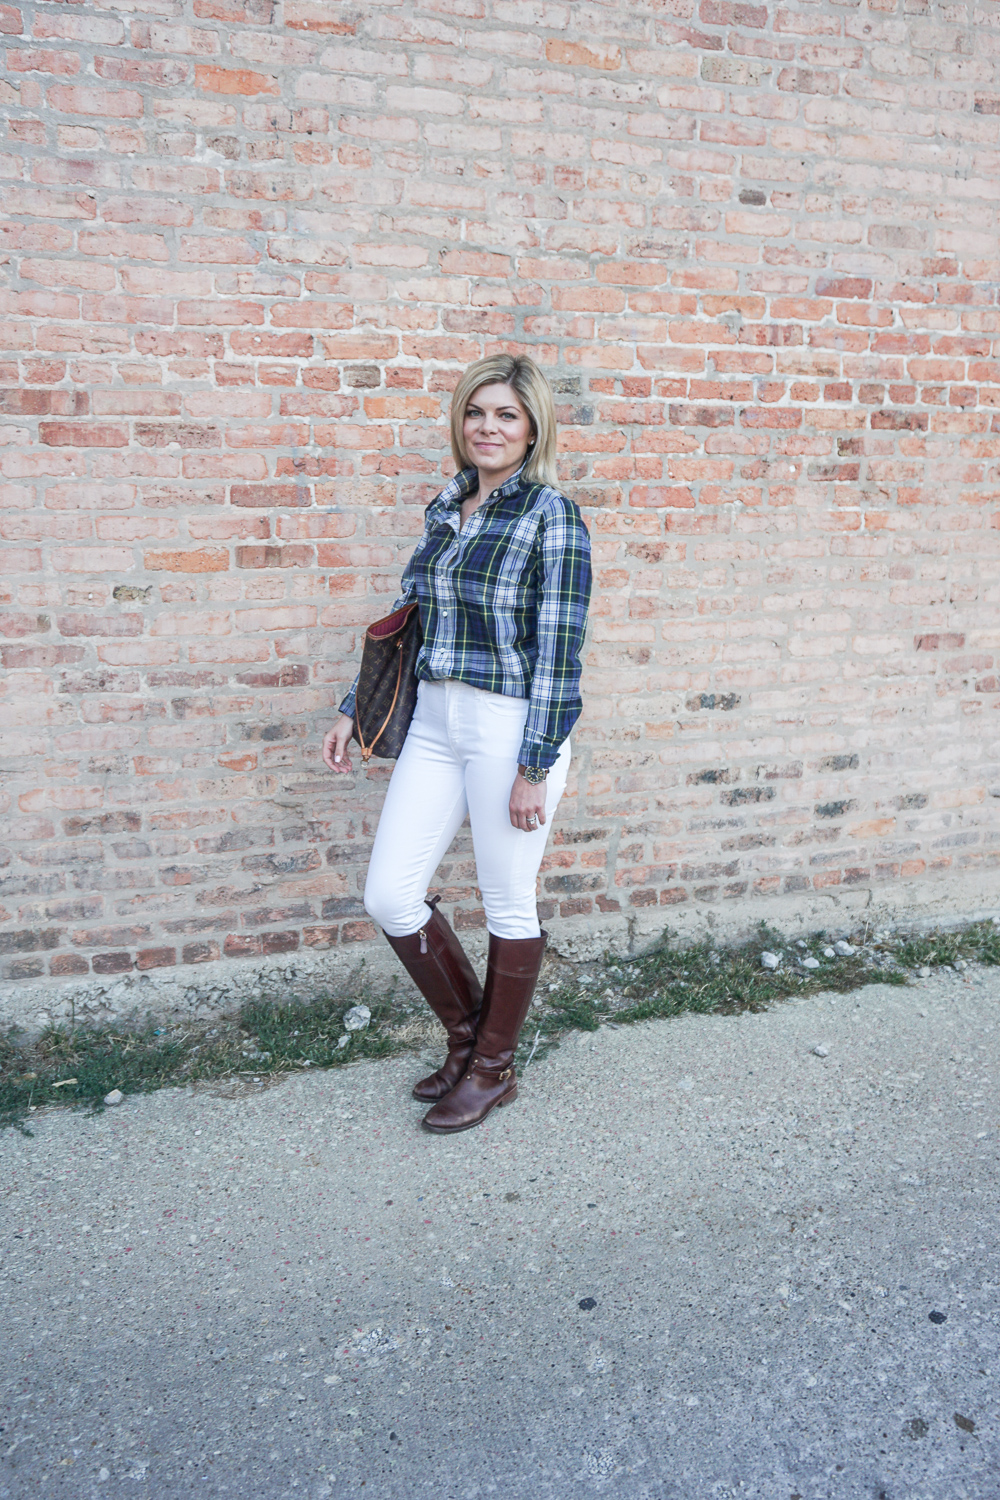 White Jeans & Boots - Cashmere & Jeans